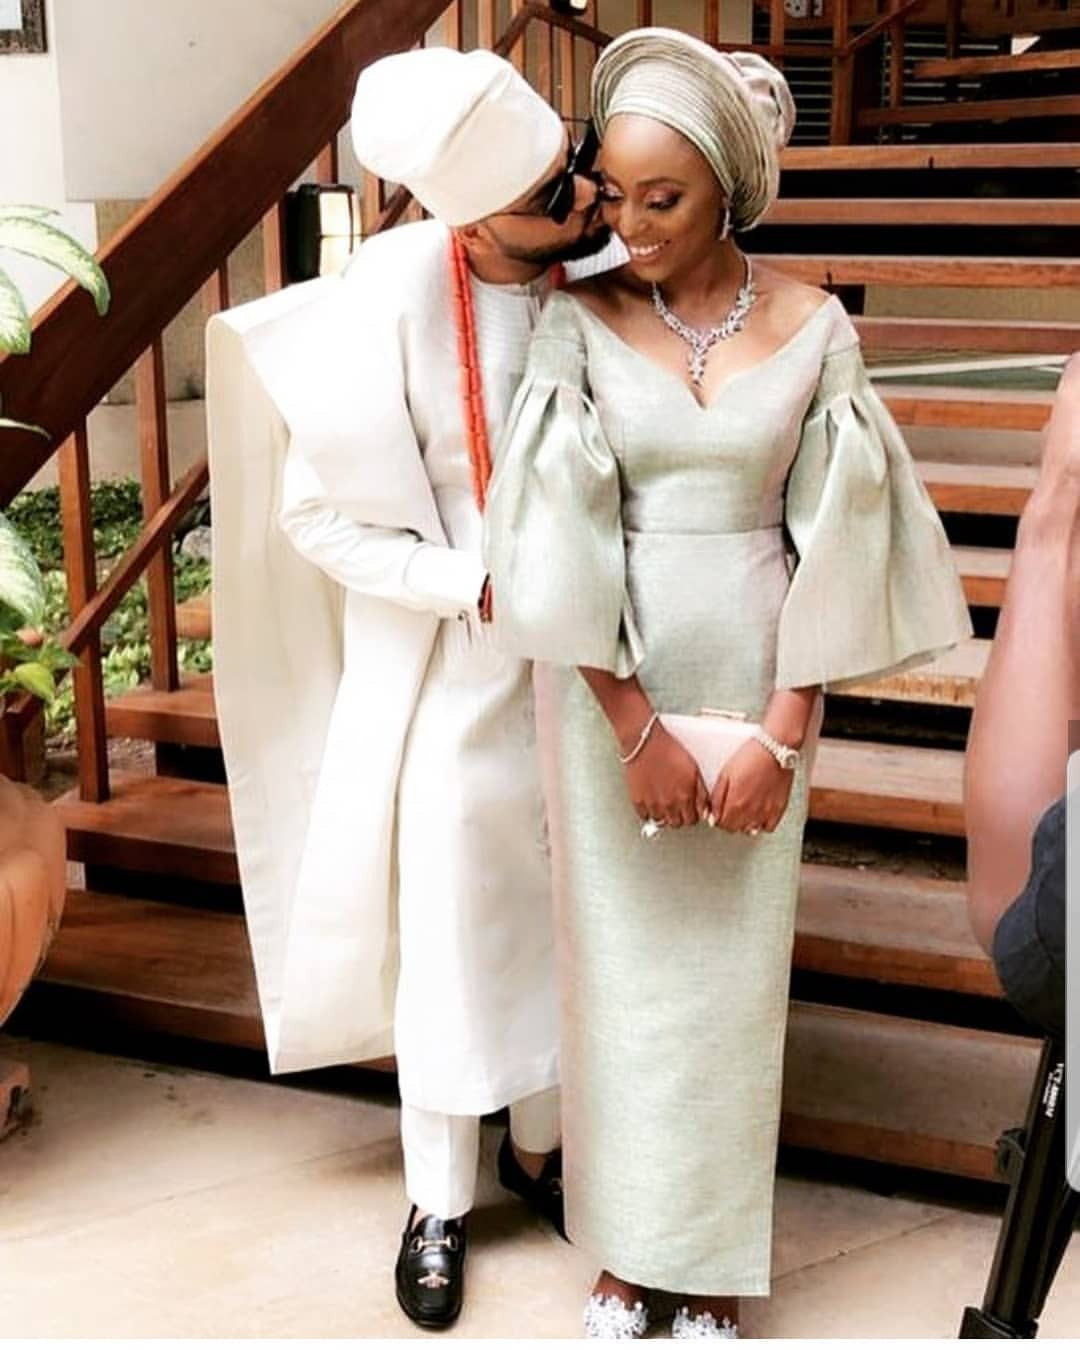 Photos from the traditional wedding of media personality, Illrymz